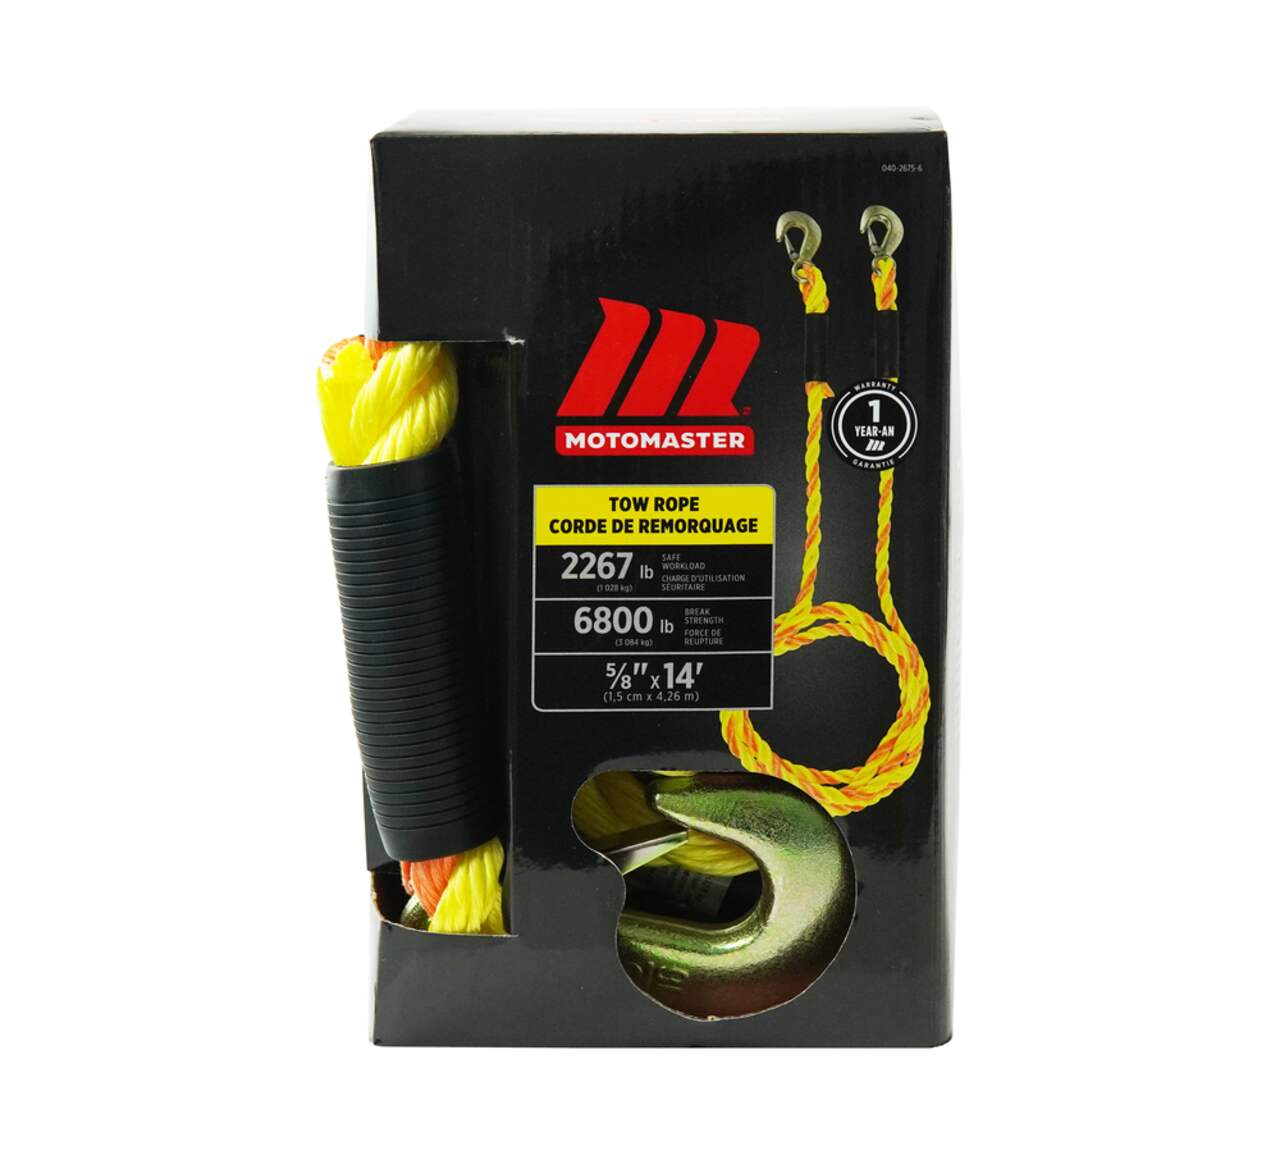 https://media-www.canadiantire.ca/product/automotive/automotive-outdoor-adventure/tarps-cords/0402675/14ft-6-800lb-tow-rope-w-hooks-1pk-82c51f72-8a9f-4364-b102-061836f46768.png?imdensity=1&imwidth=1244&impolicy=mZoom